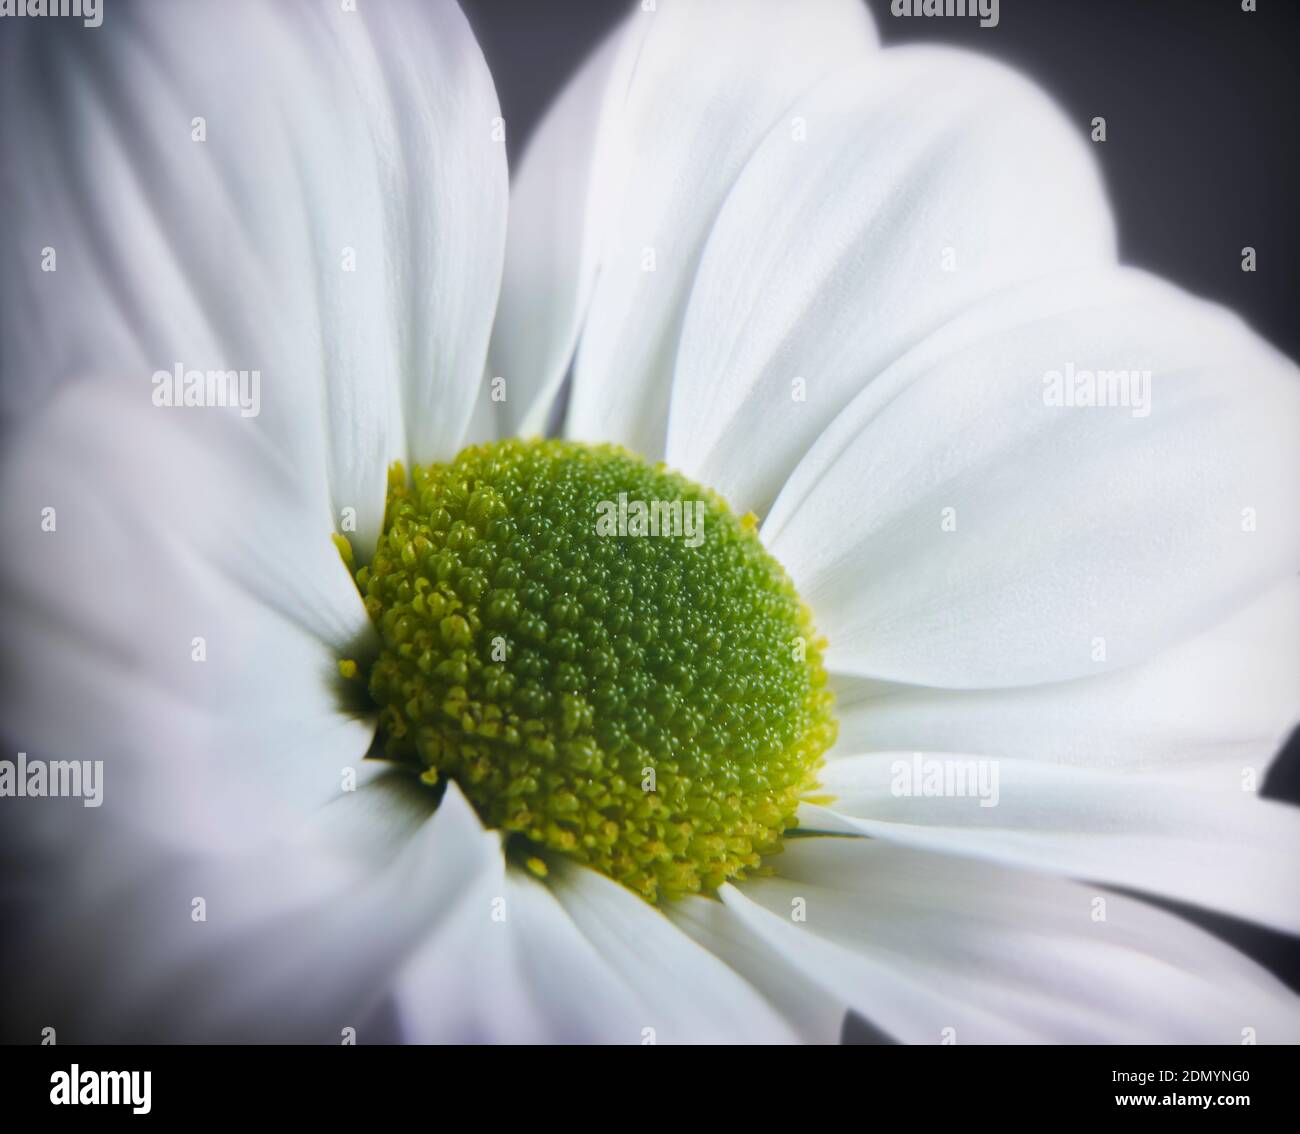 Close up photograph of white daisy gerbera flower showing the stamen and petals Stock Photo